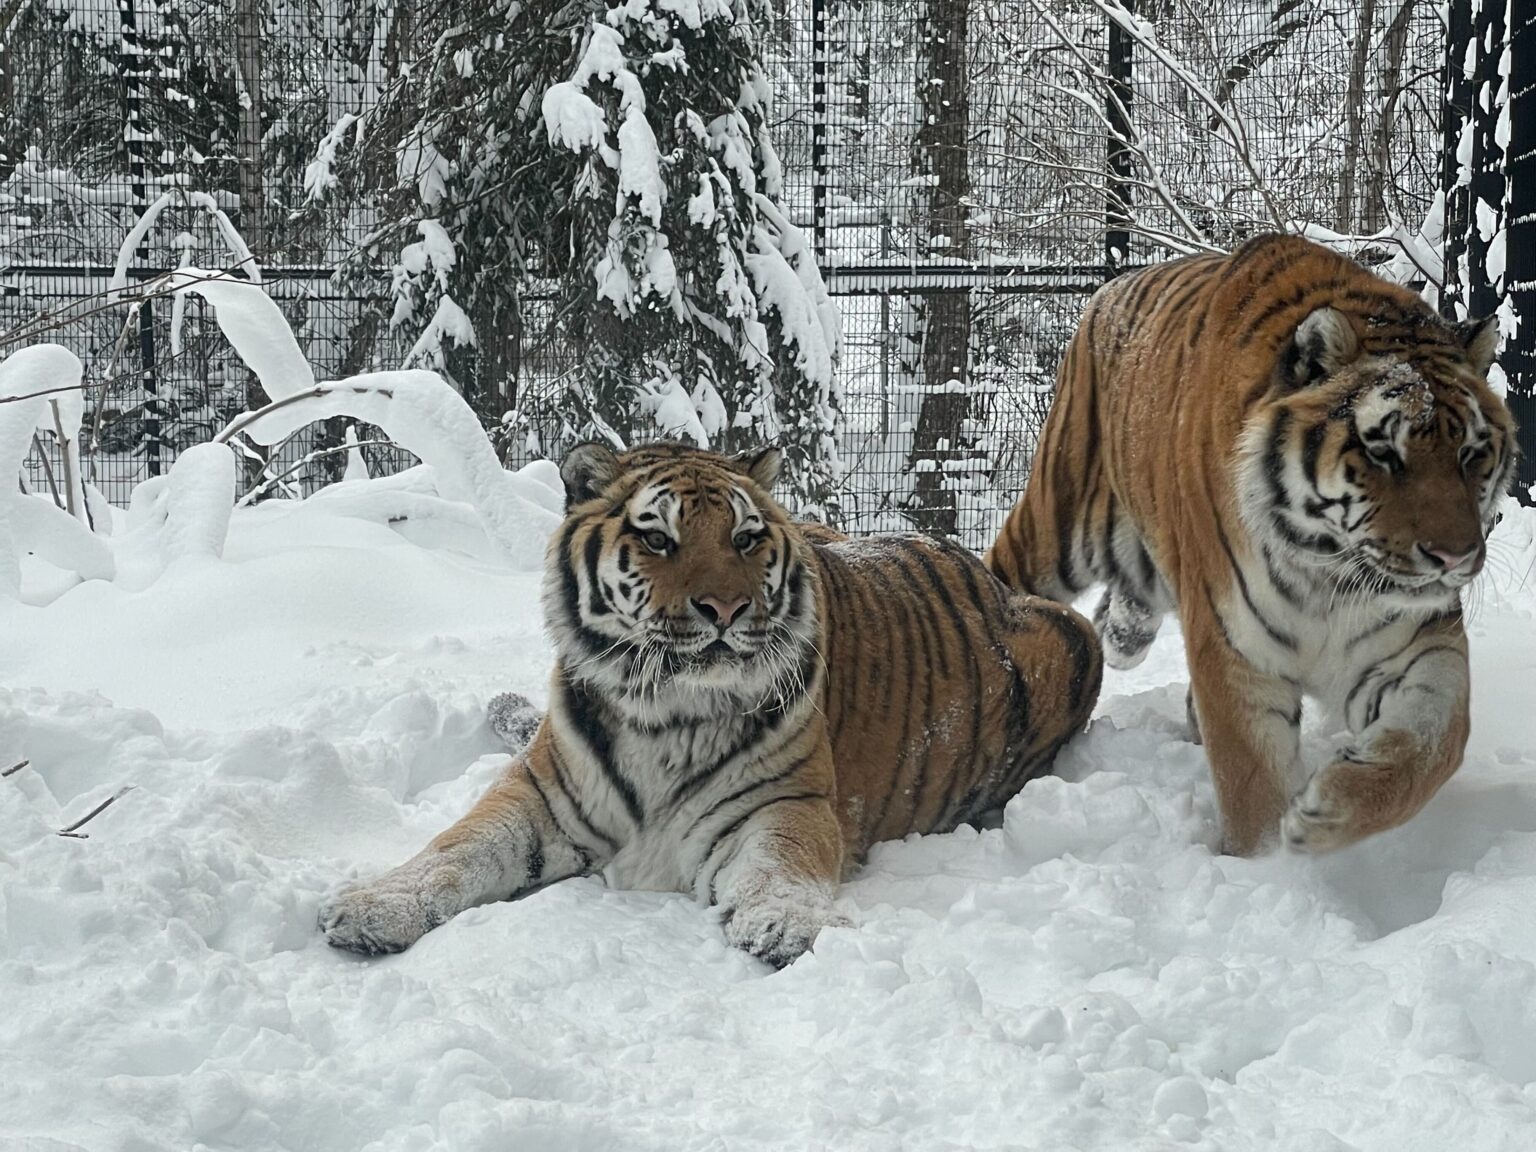 One tiger lies down and another walks inside a snowy pen.